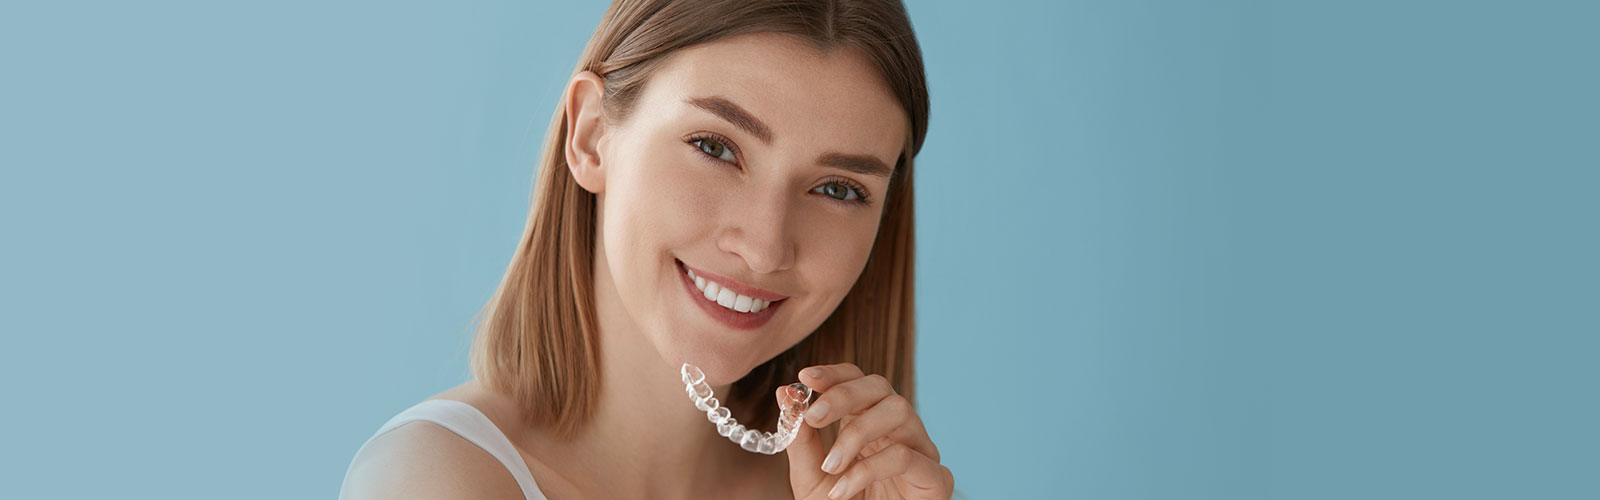 Woman holding invisalign clear aligner